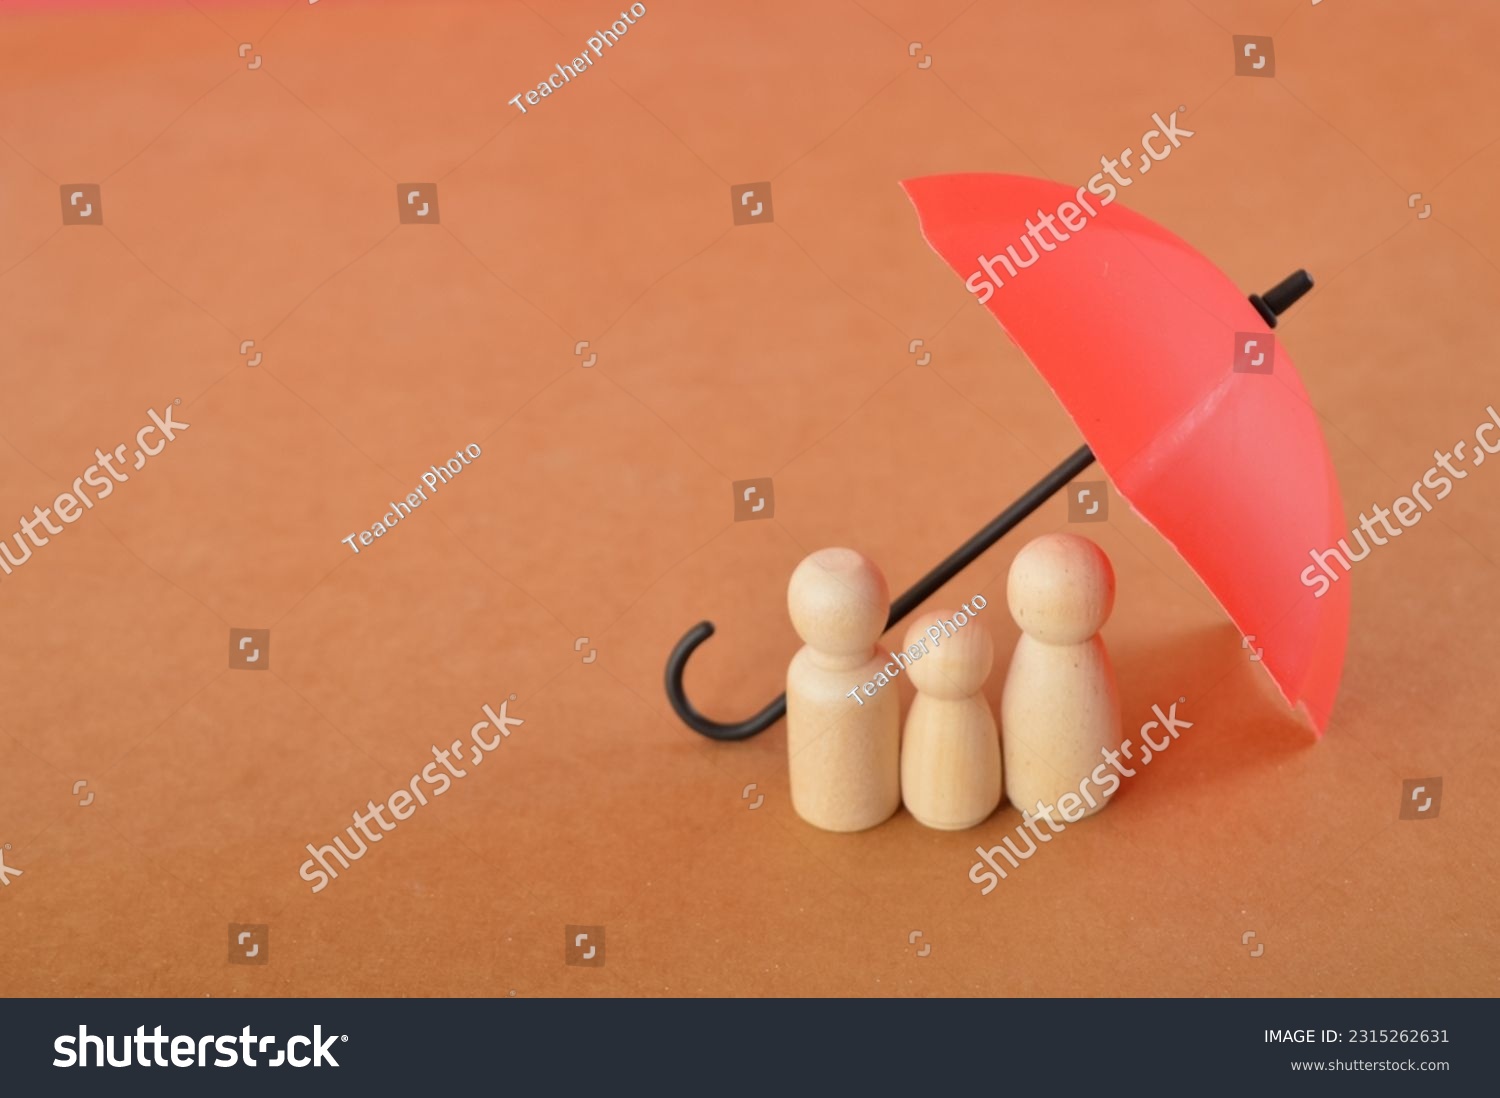 Red toy umbrella and wooden doll figures isolated on a brown background. Insurance coverage concept. #2315262631